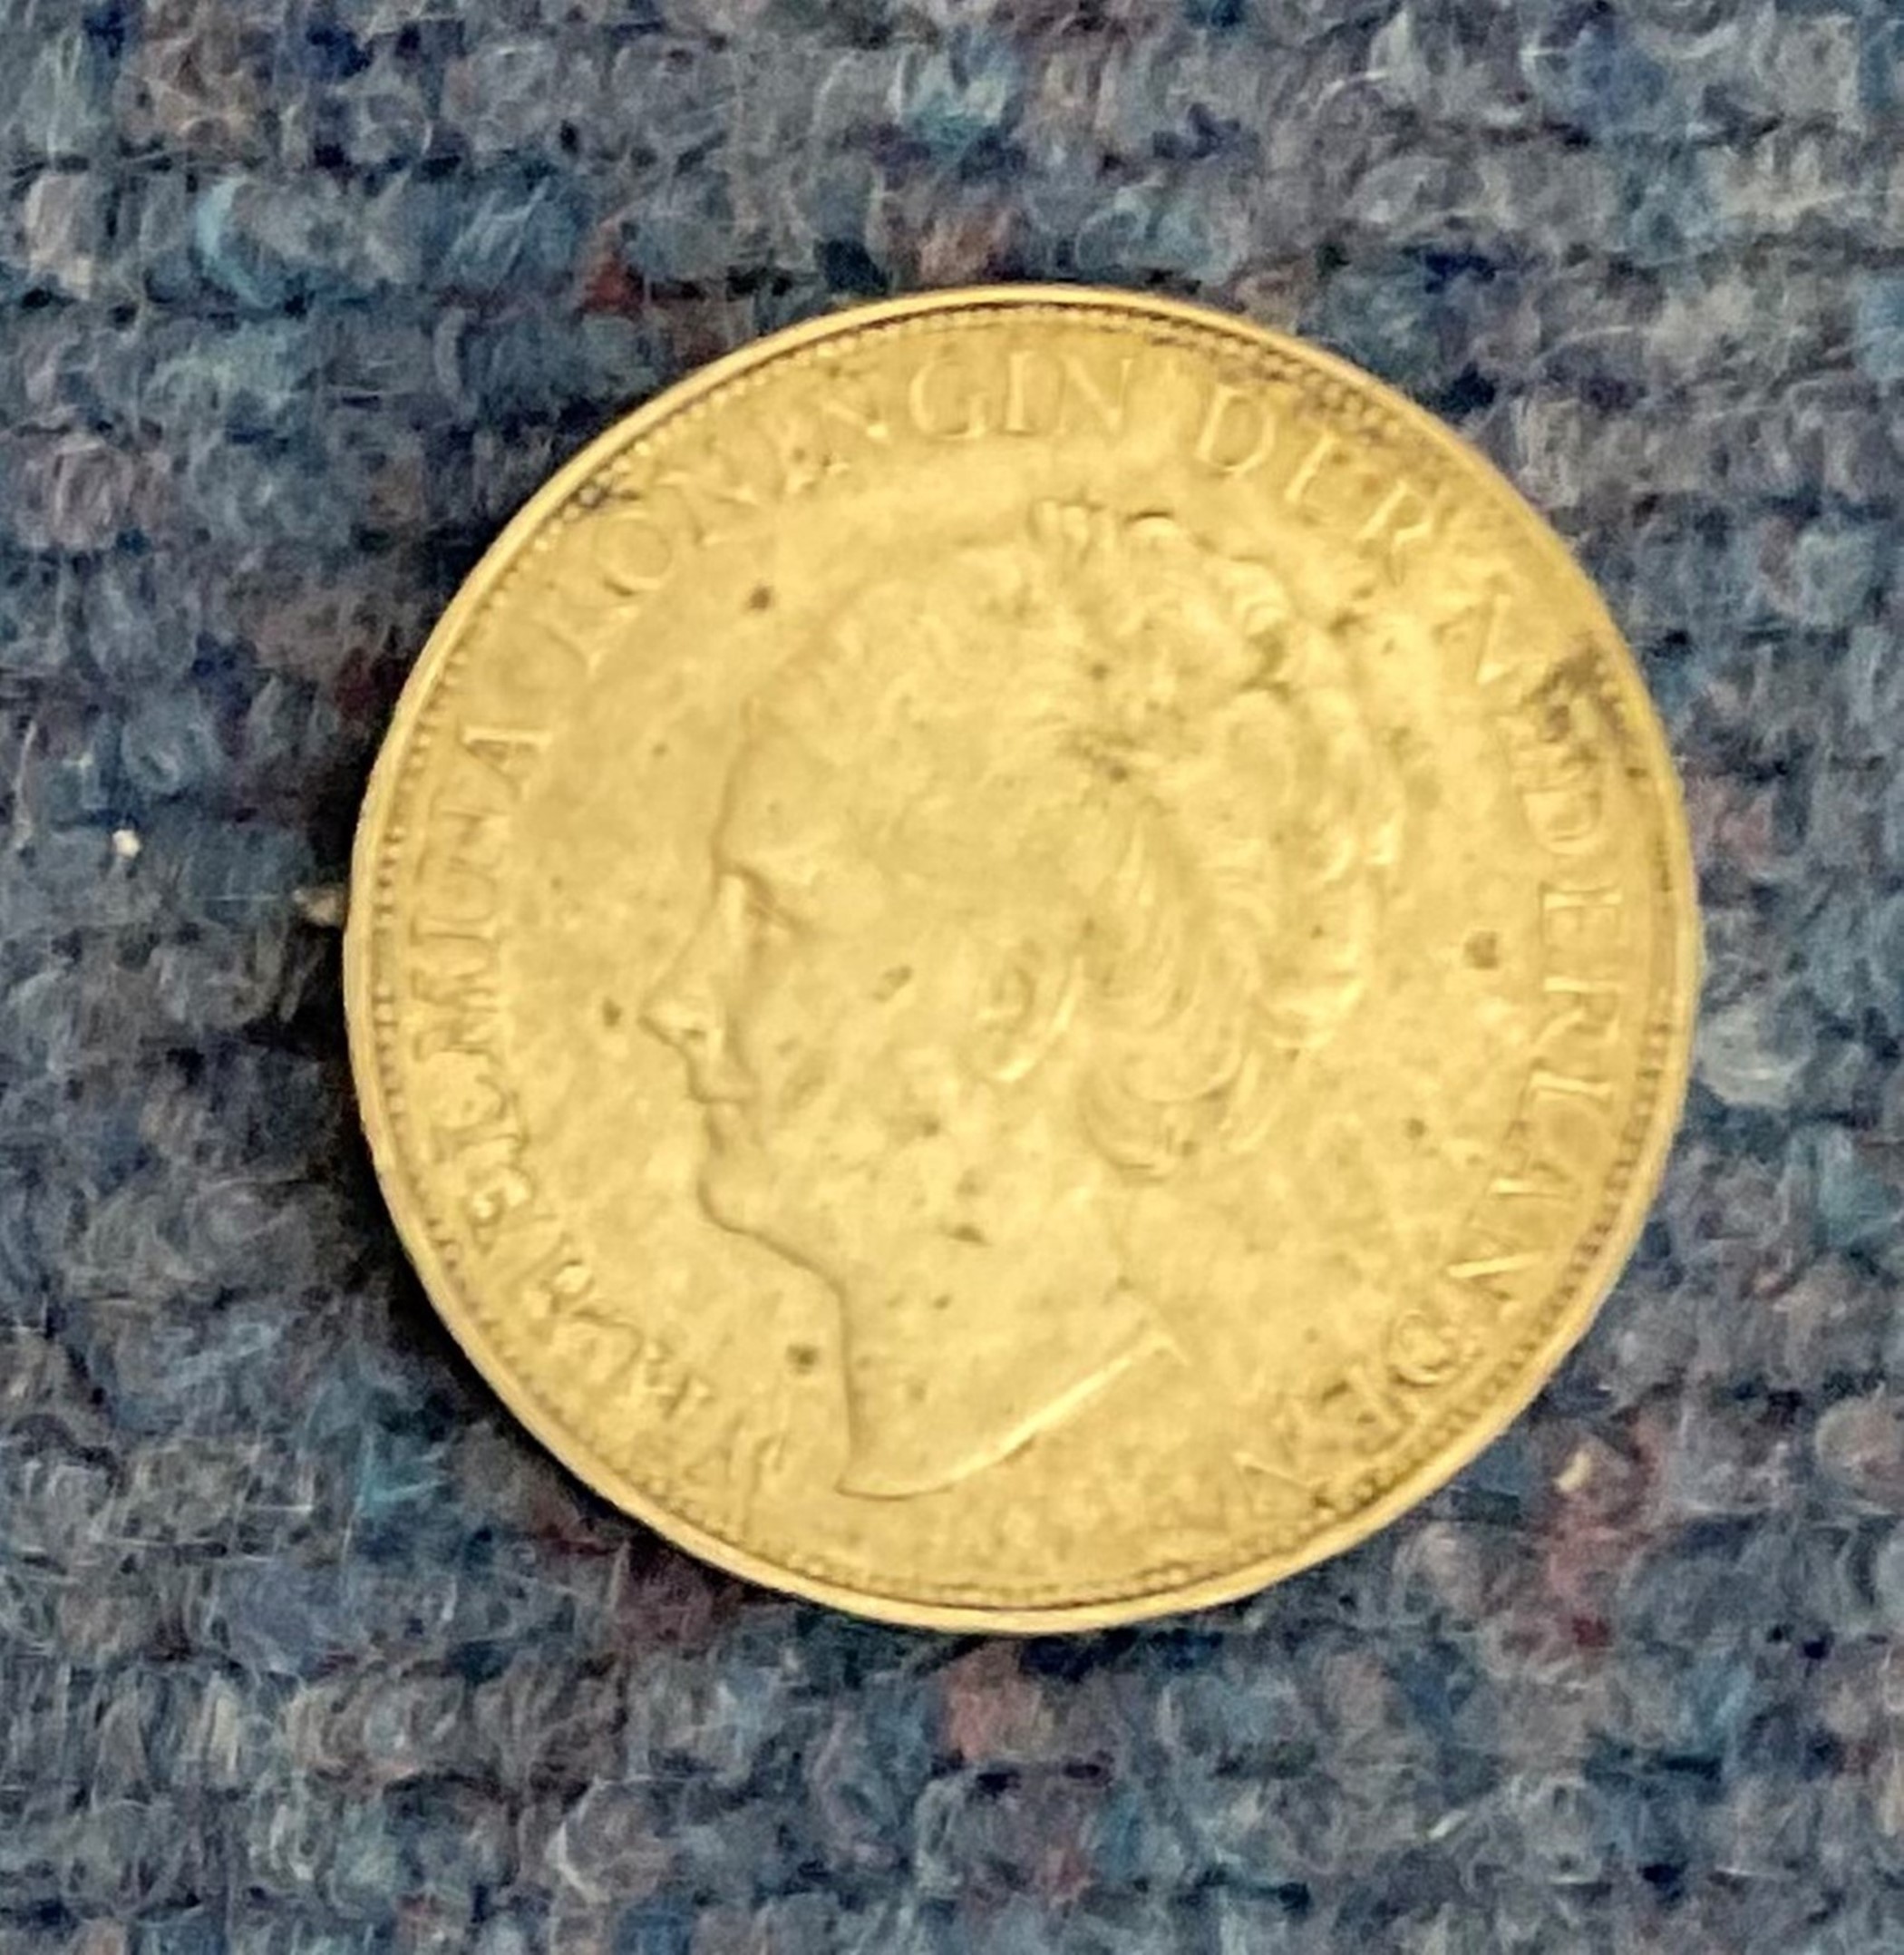 Netherlands Two and Half Guilder Coin 1929. Good condition. We combine postage on multiple winning